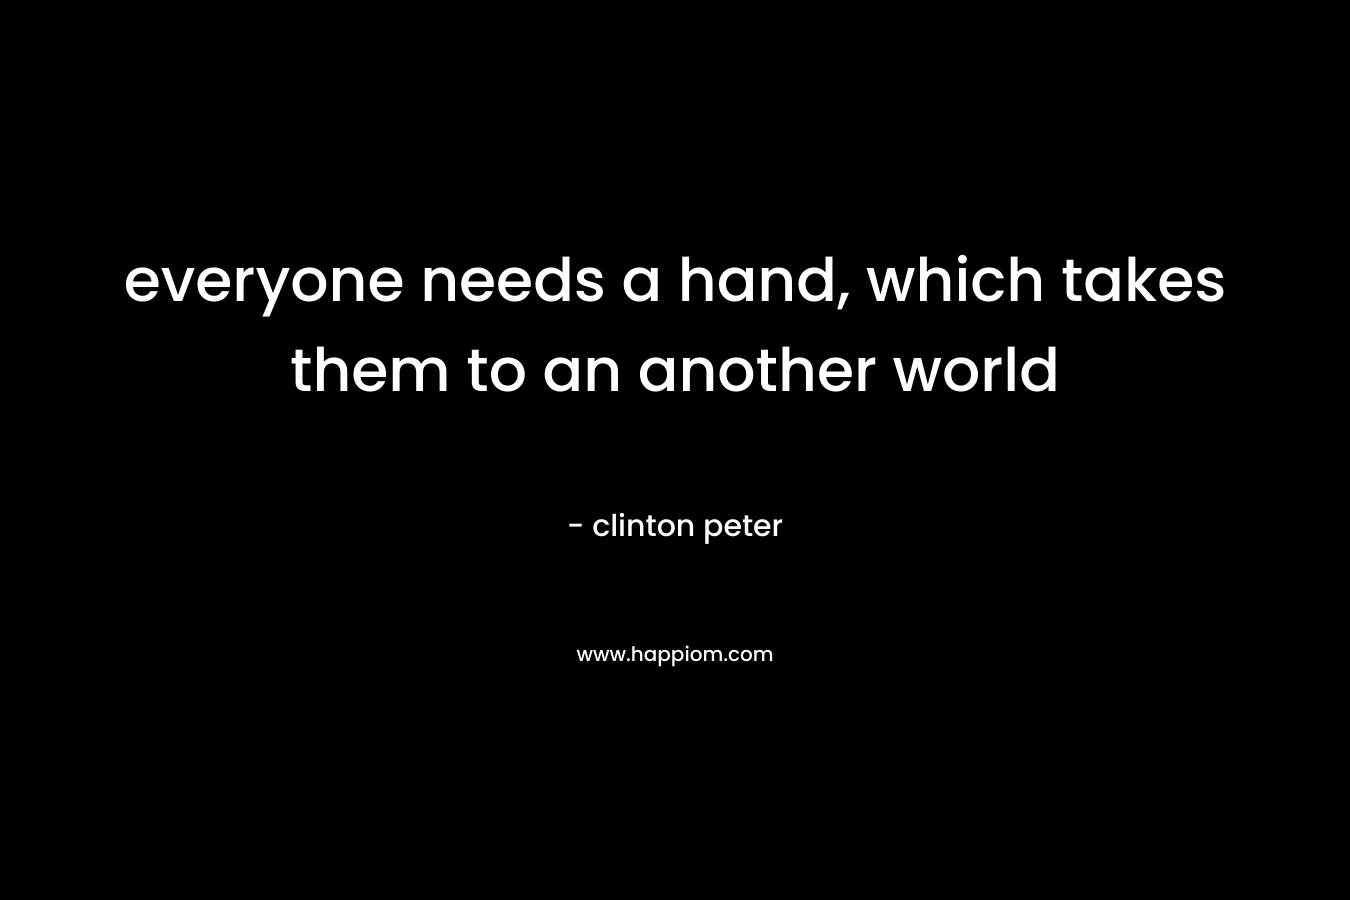 everyone needs a hand, which takes them to an another world